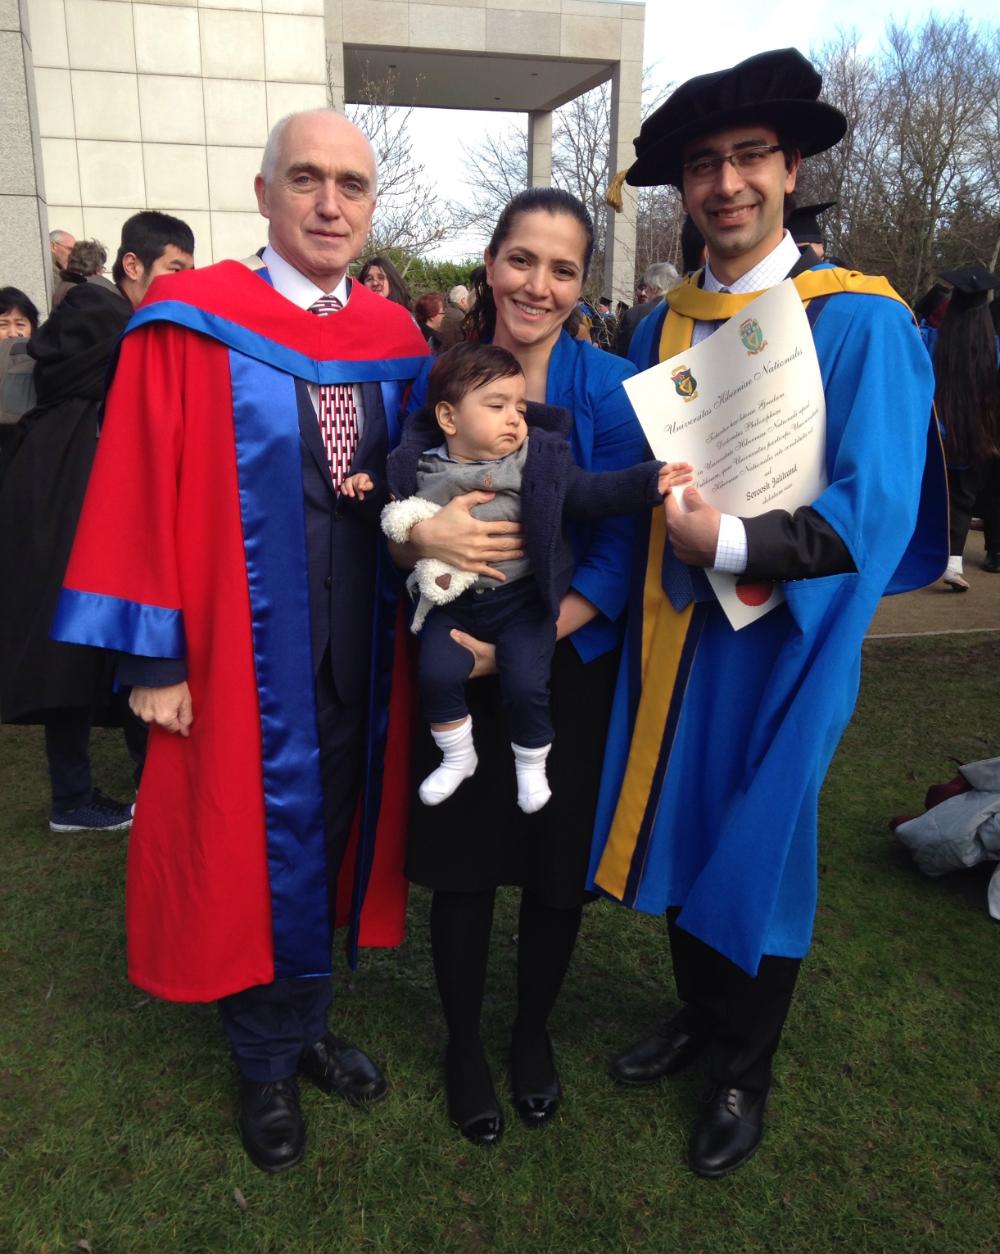 Dr Soroosh Jalilvand received his PhD in December. He is pictured here with Professor Eugene OBrien and his wife Dr Sogol Fallah (graduate of 2016) and son, Kian